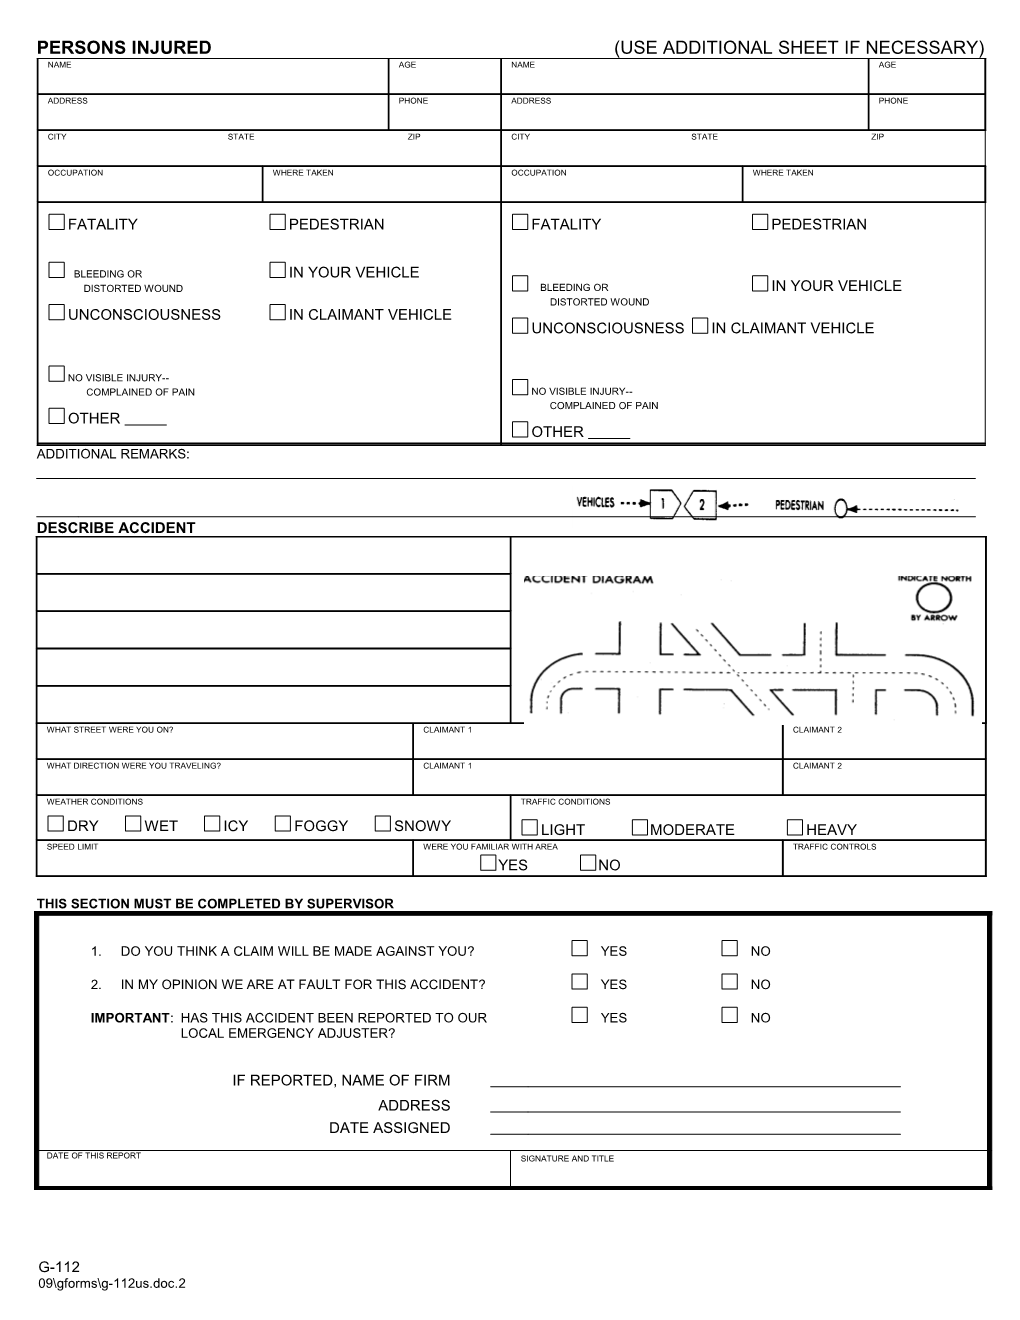 Immediately After an Accident Fill out This Form and Send To